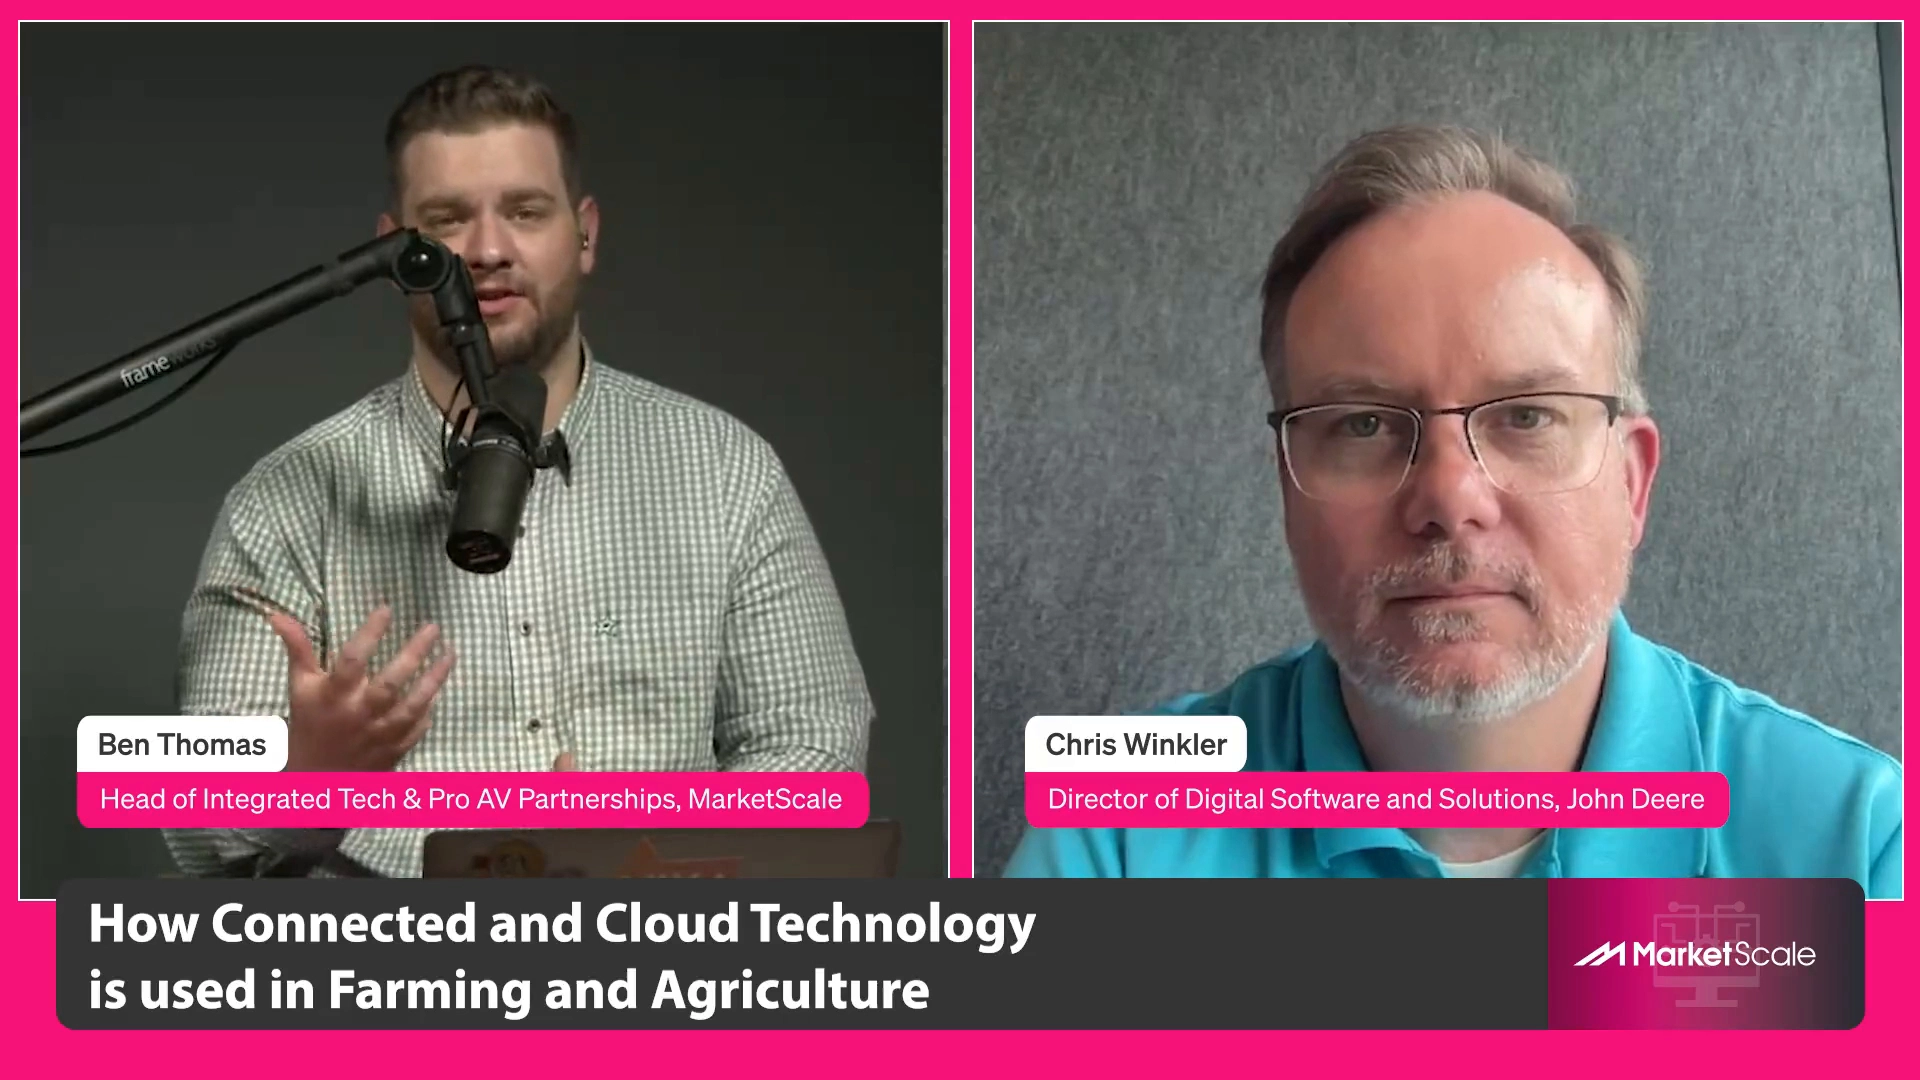 AgTech Revolution: John Deere’s Director Discusses Tech-Driven Sustainability in Agriculture